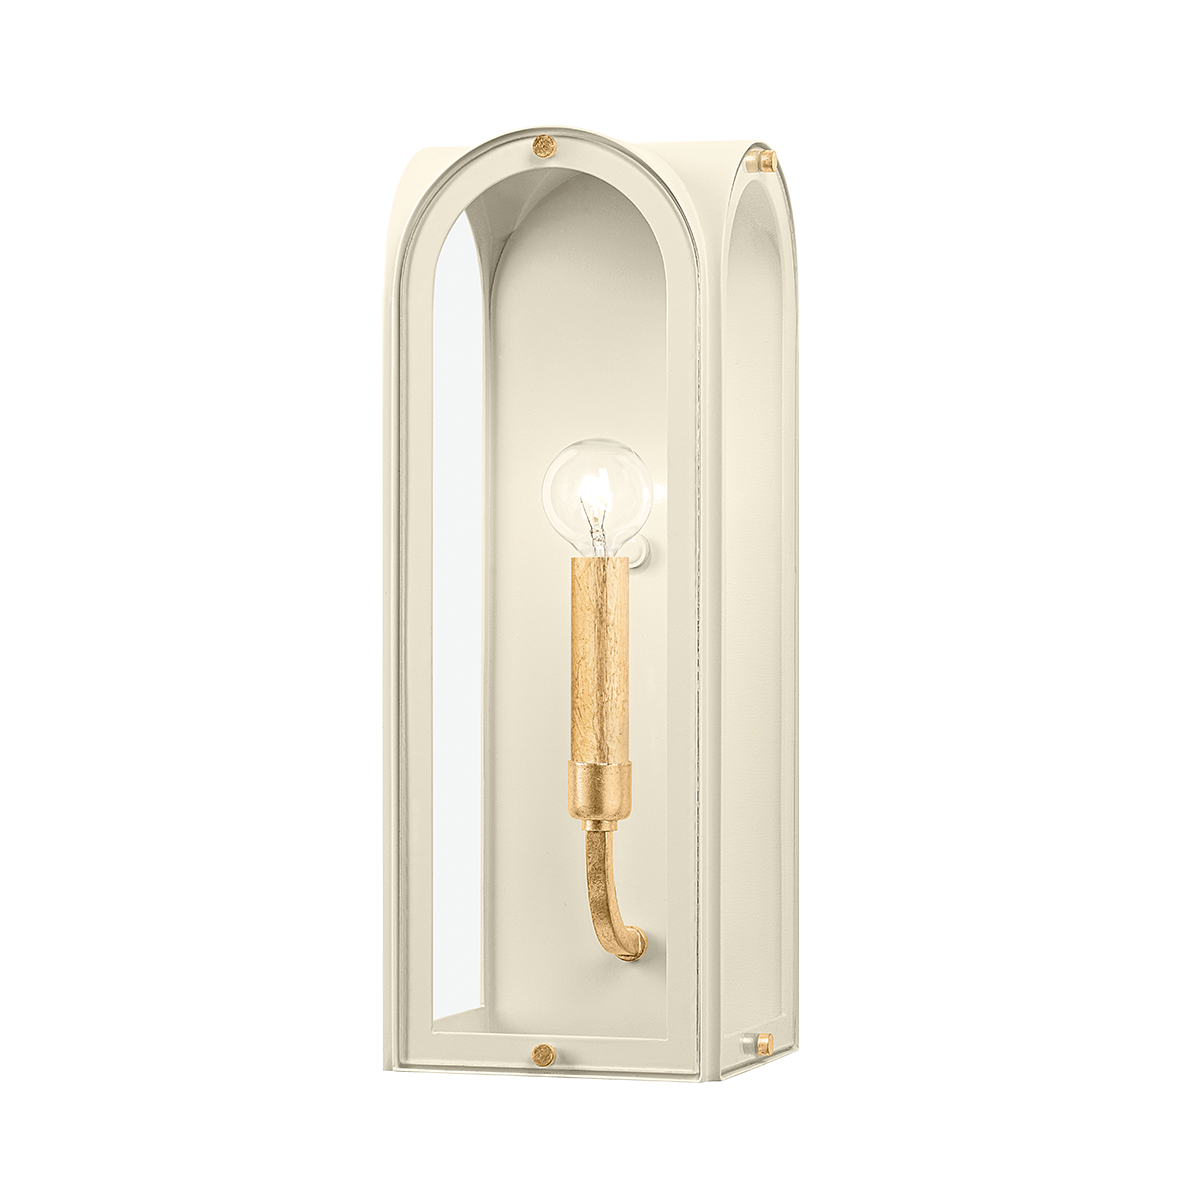 Hudson Valley Lighting LINCROFT Wall Sconce